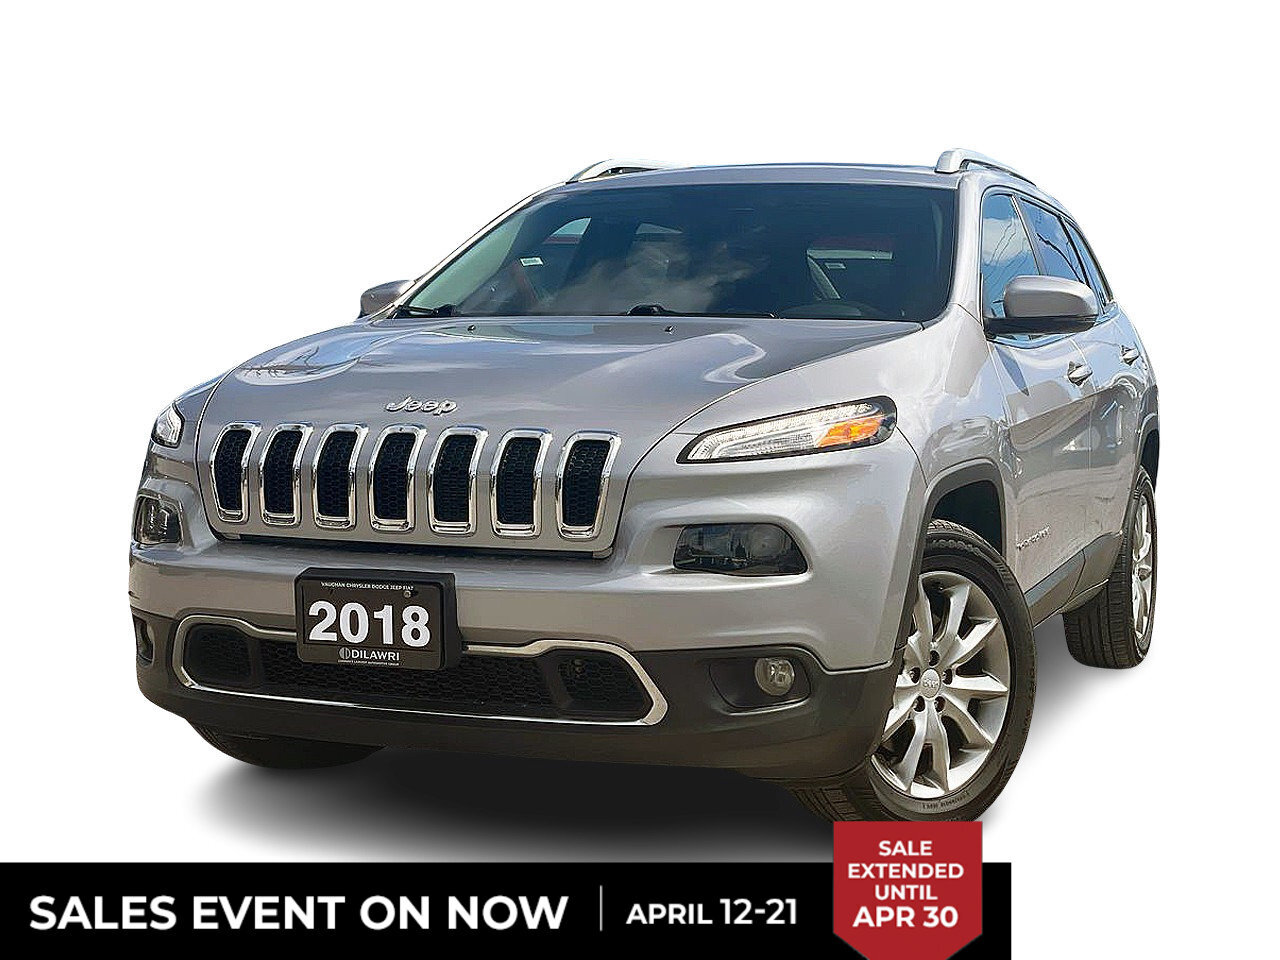 2018 Jeep Cherokee 4x4 Limited 1 Owner | Leather Seats | Clean Carfax